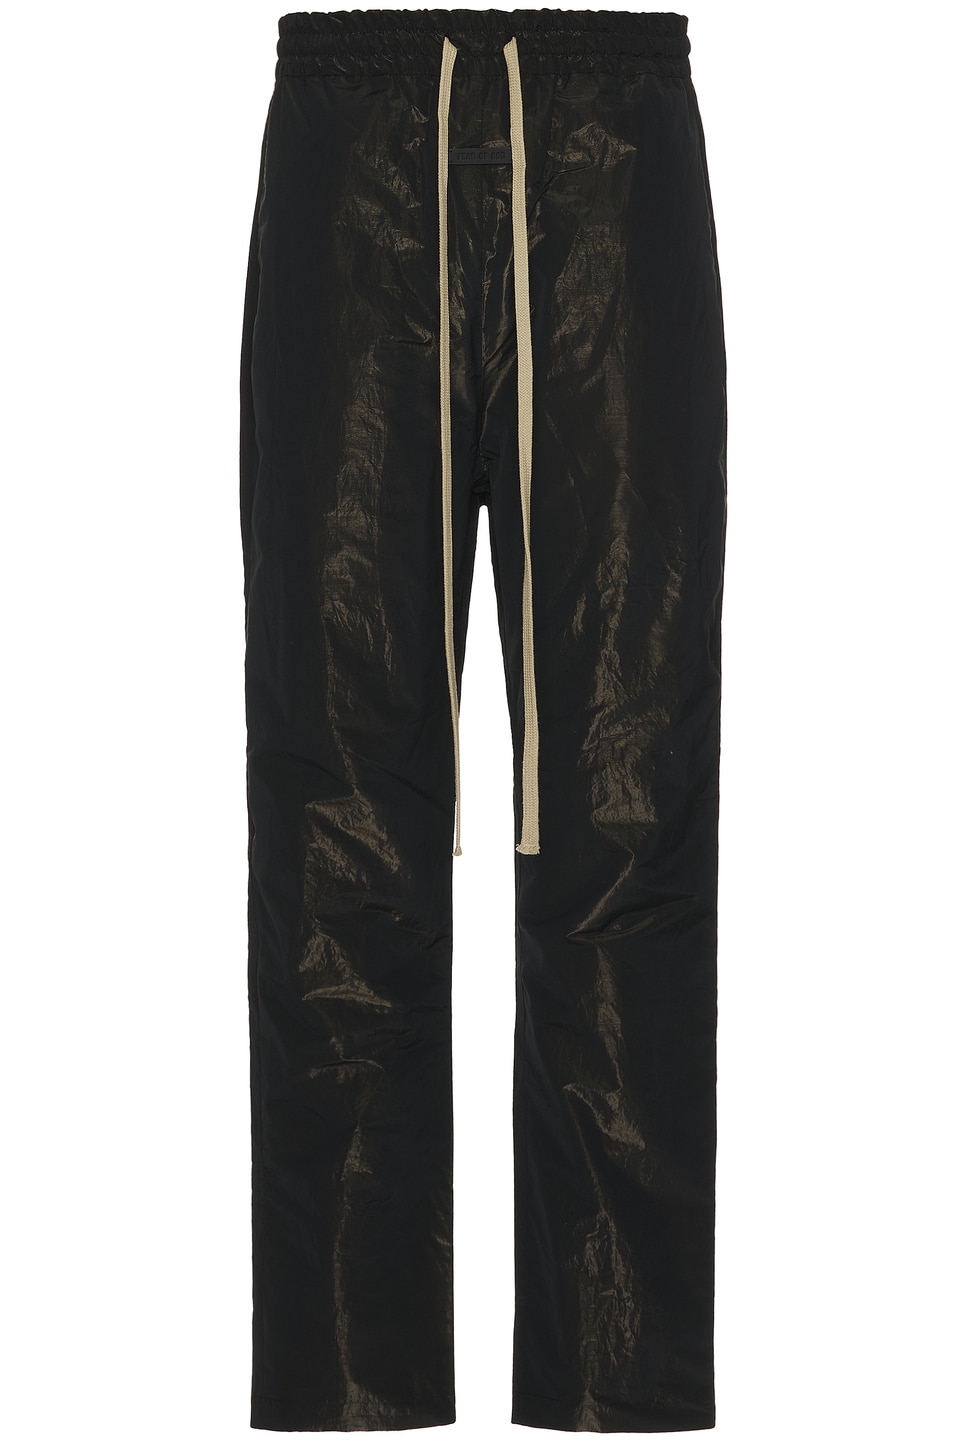 Image 1 of Fear of God Wrinkled Polyester Forum Pant in Black